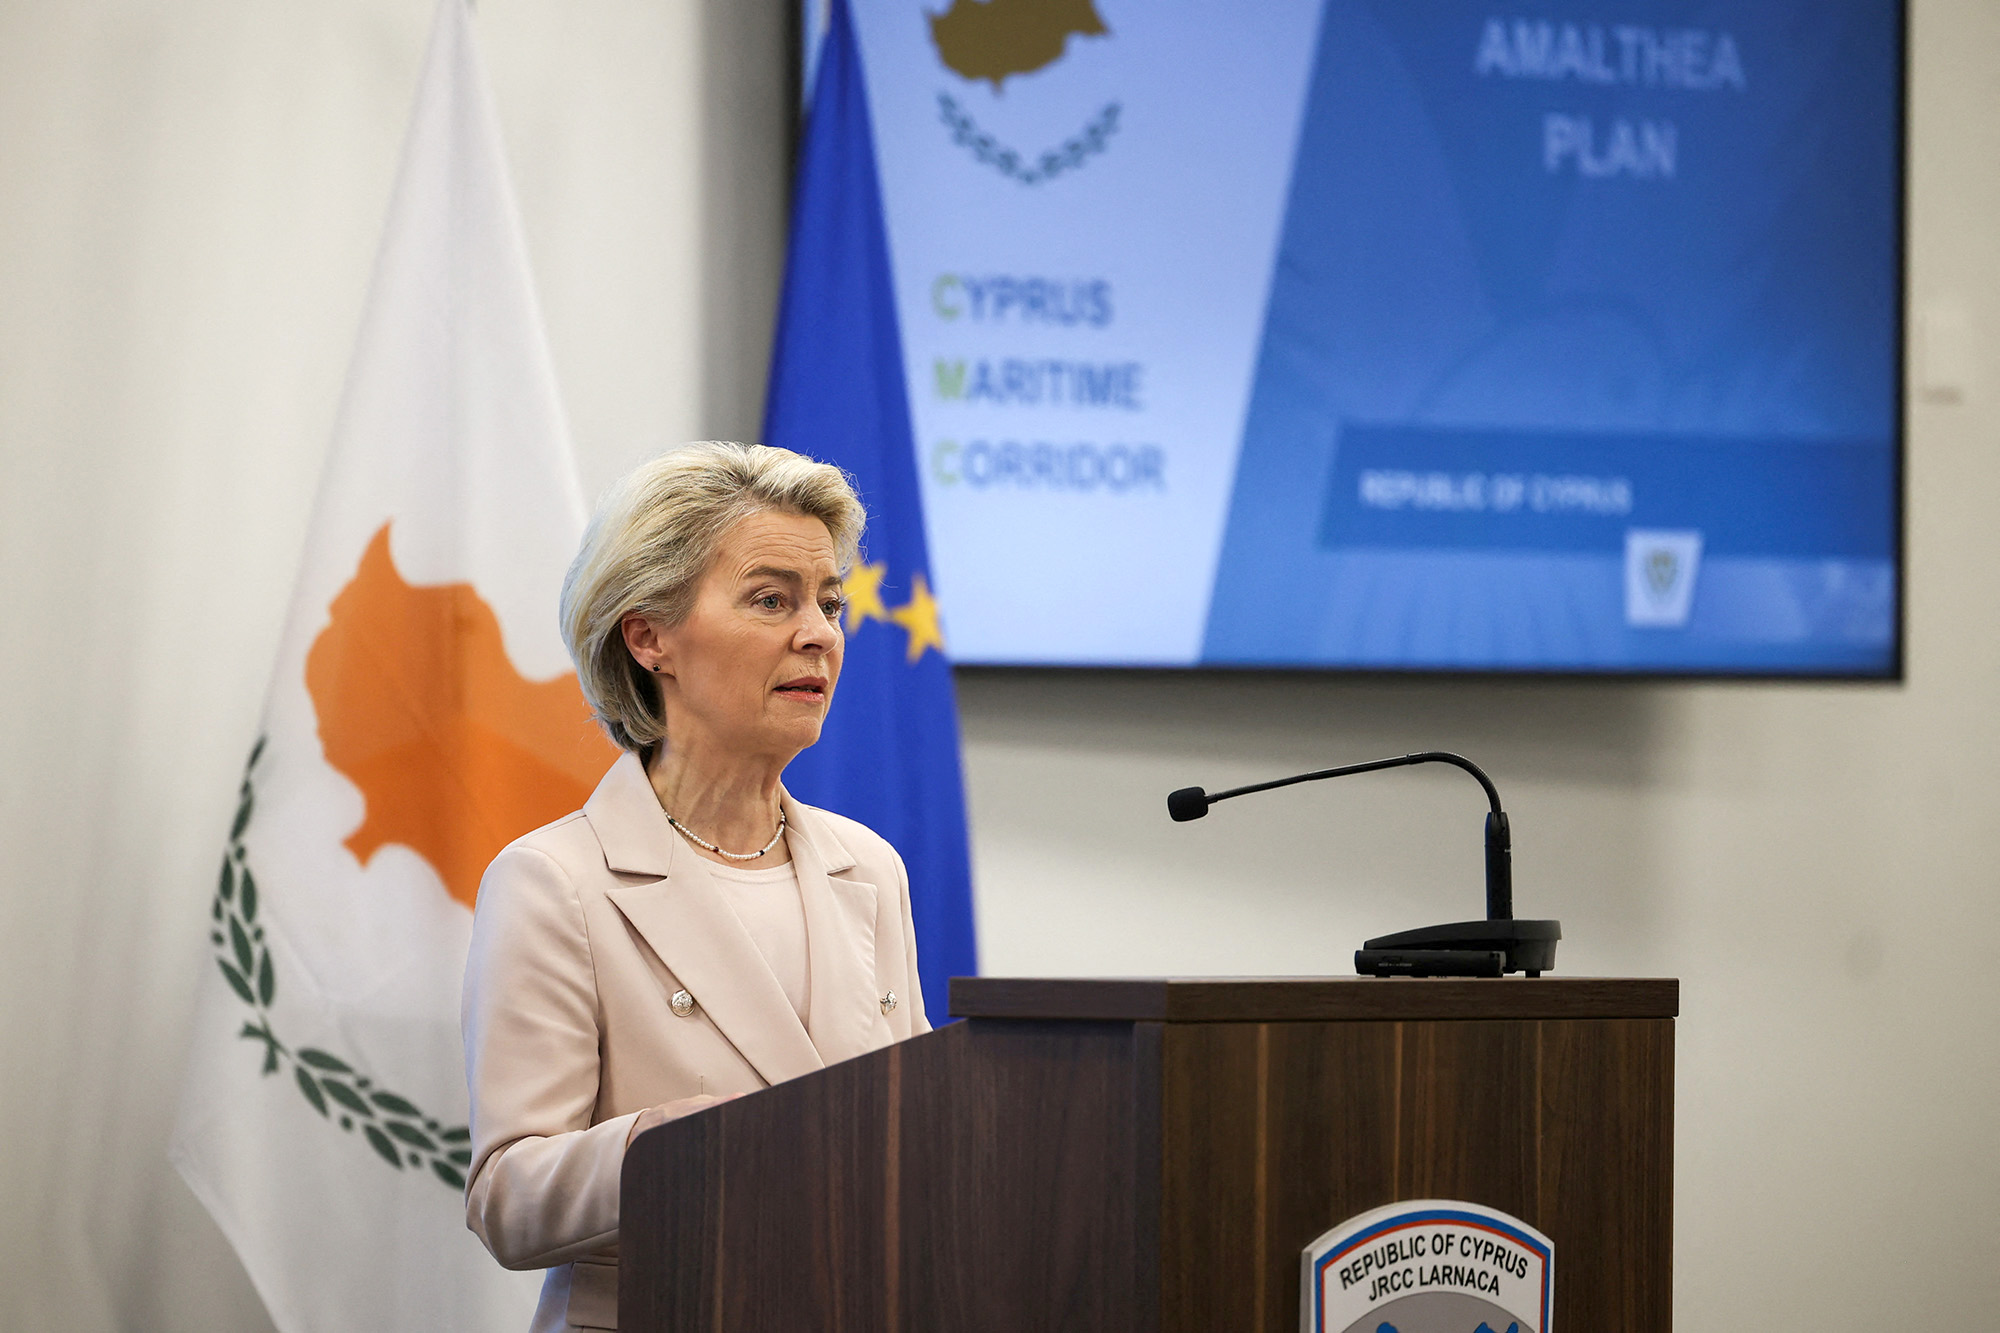 European Commission President Ursula von der Leyen speaks as she attends a press conference at the Zenon Joint Rescue Coordination Center in Larnaca, Cyprus, on March 8.